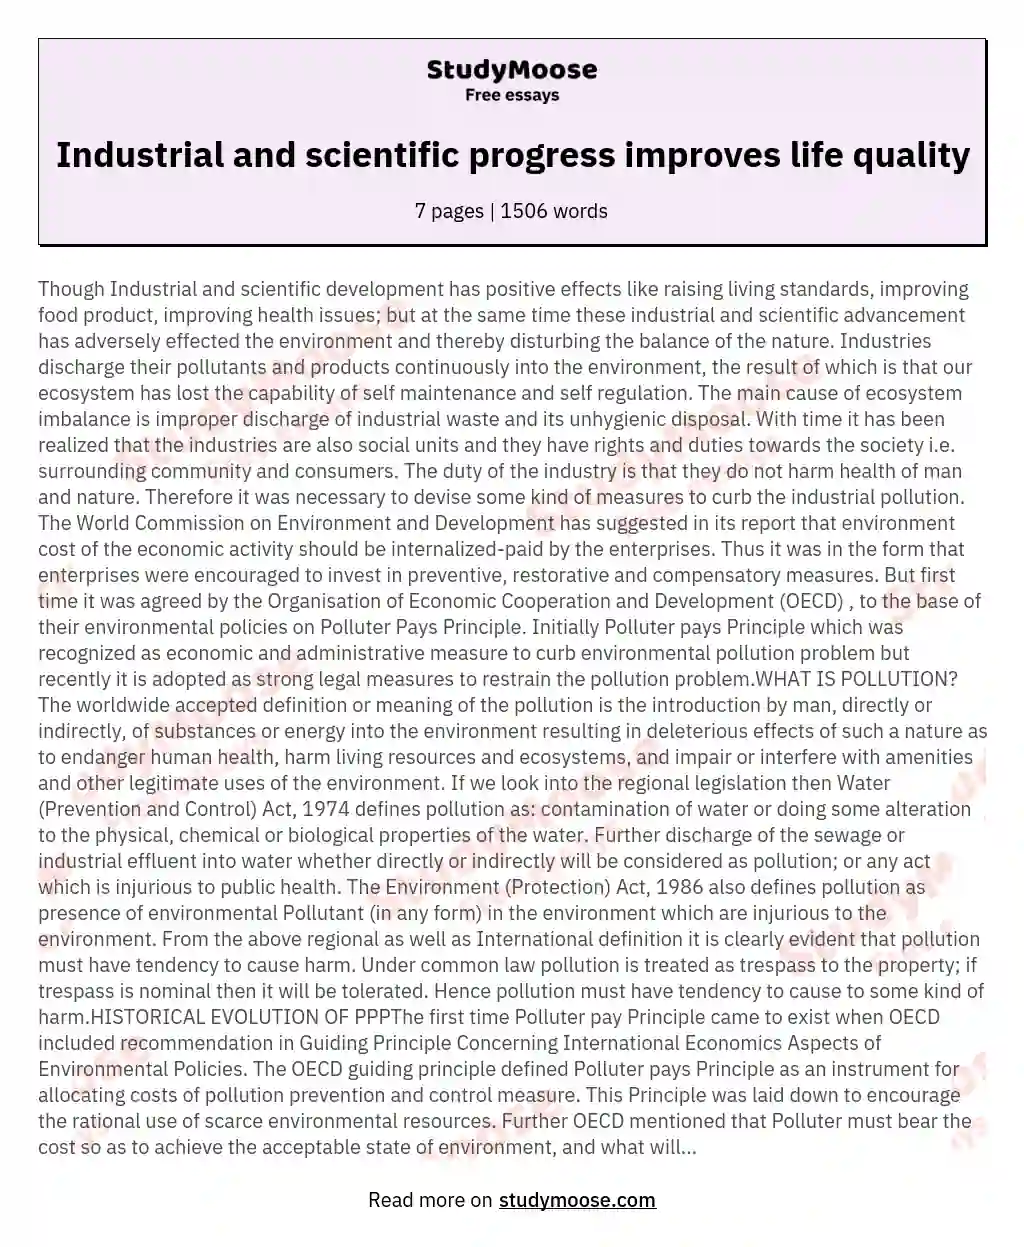 Though Industrial and scientific development has positive effects like raising living standards